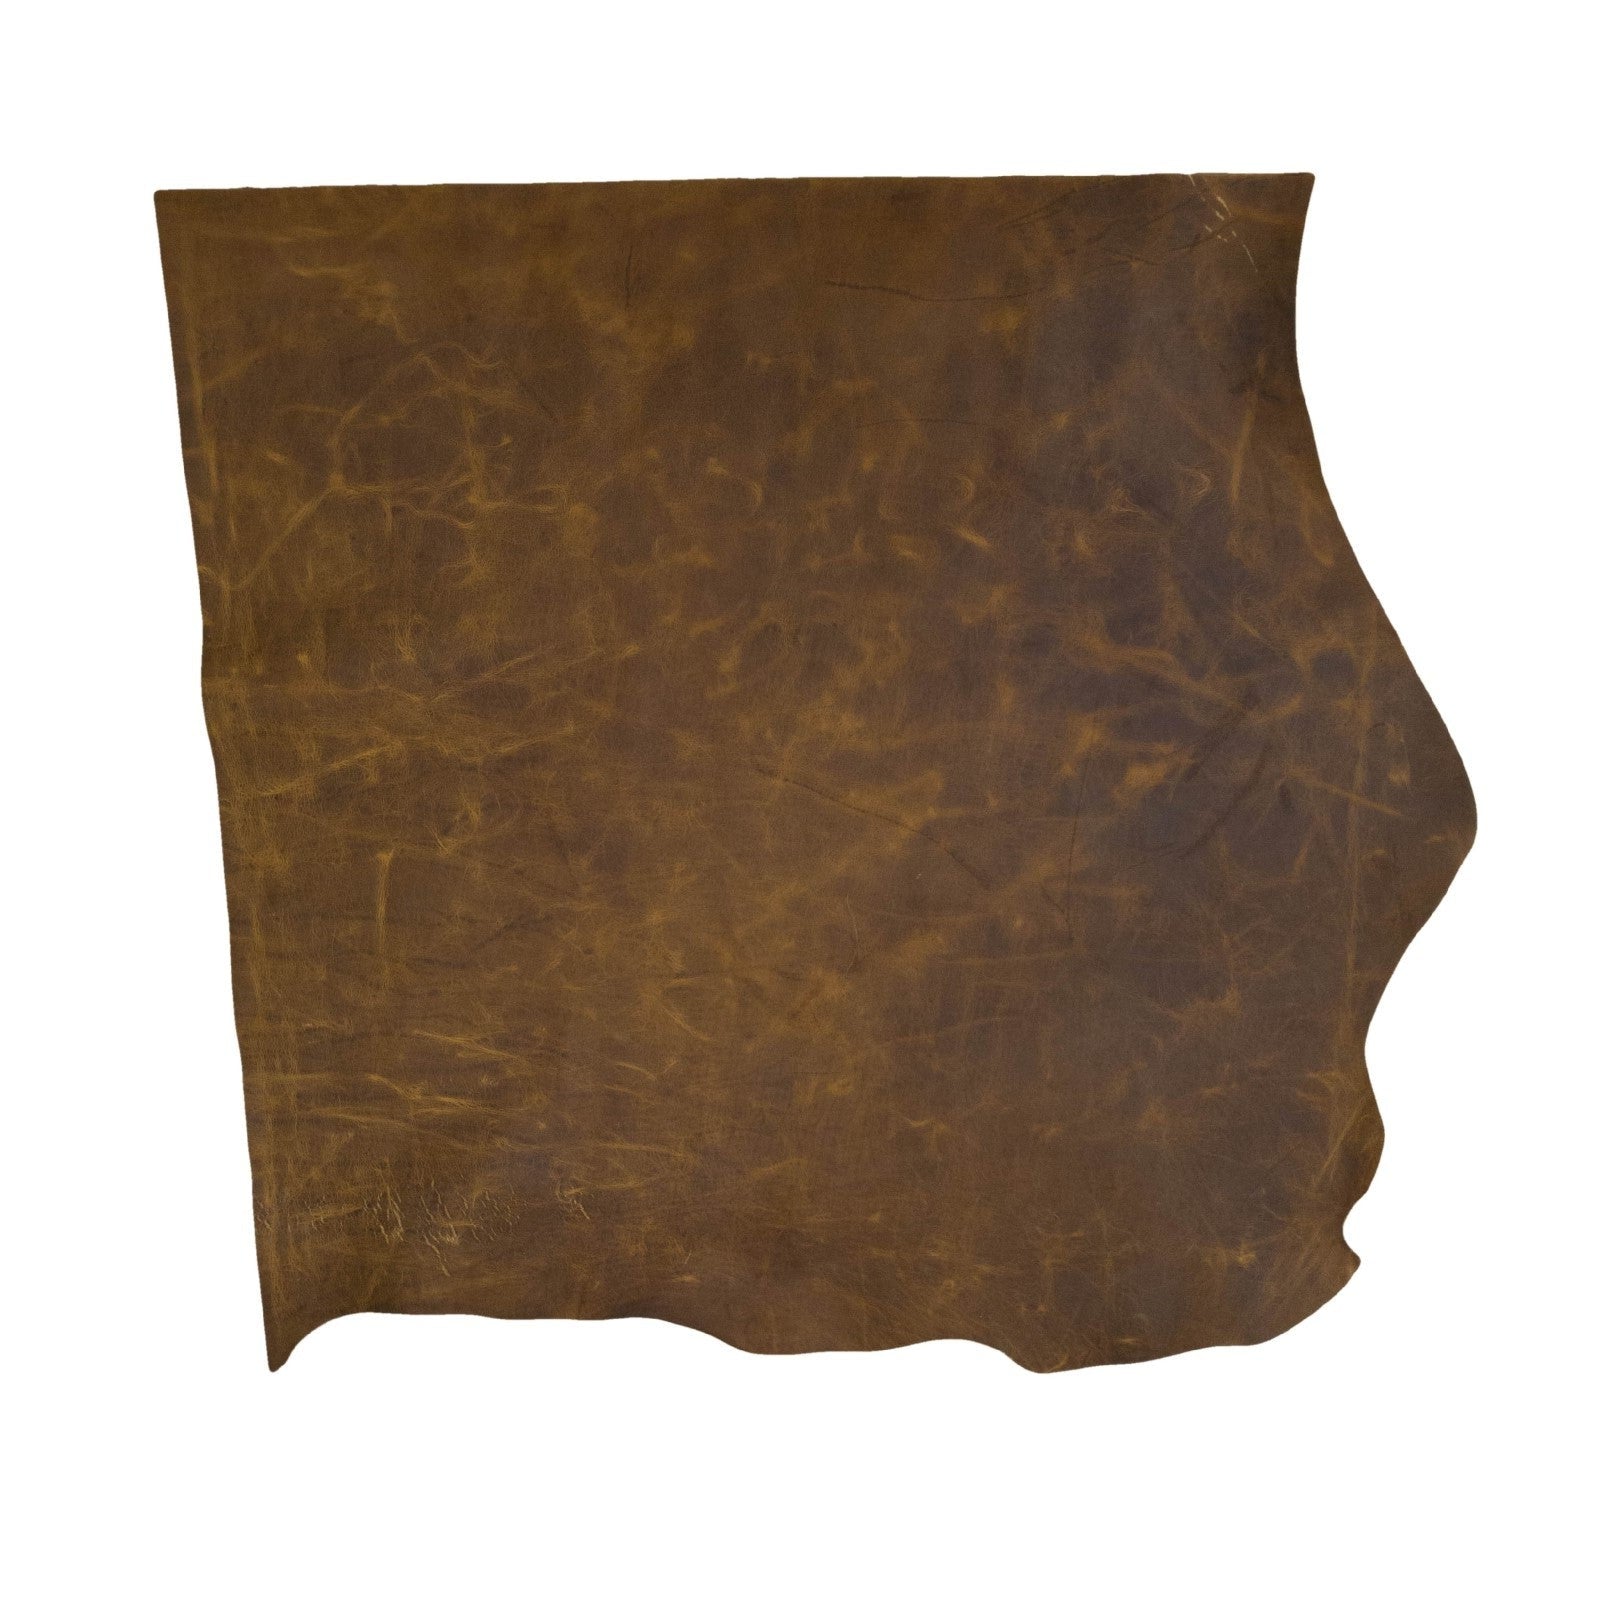 Golden Acorn Brown, 6.5-32 SqFt, 2-3 oz, Pull up Sides & Pieces, Crazy Buffalo, Bottom Piece / 6.5-7.5 | The Leather Guy